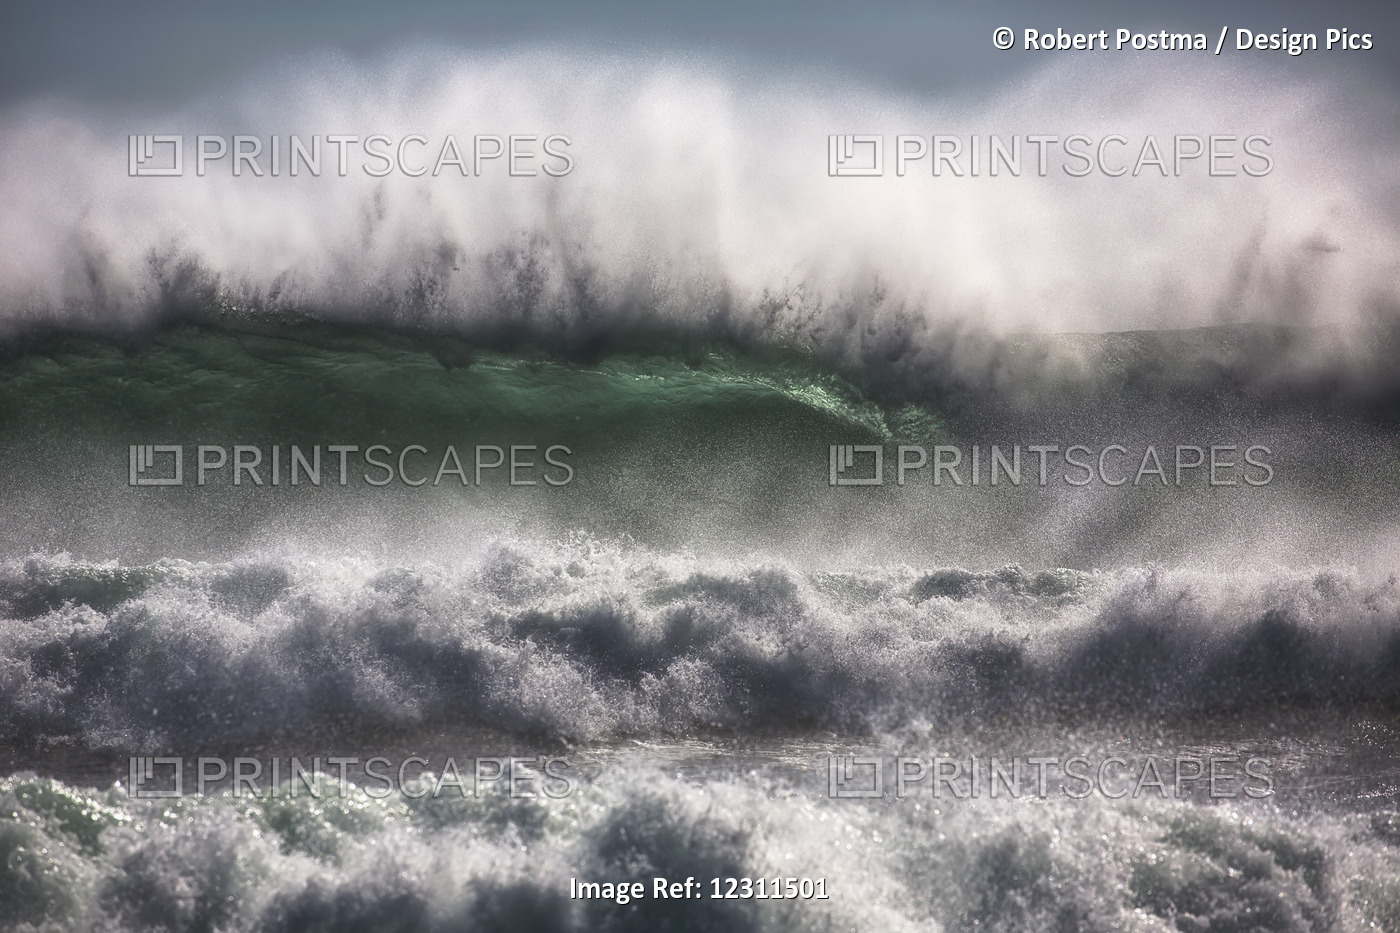 Large Waves From The South Atlantic Ocean Pound The Shore Of Cape Good Hope; ...